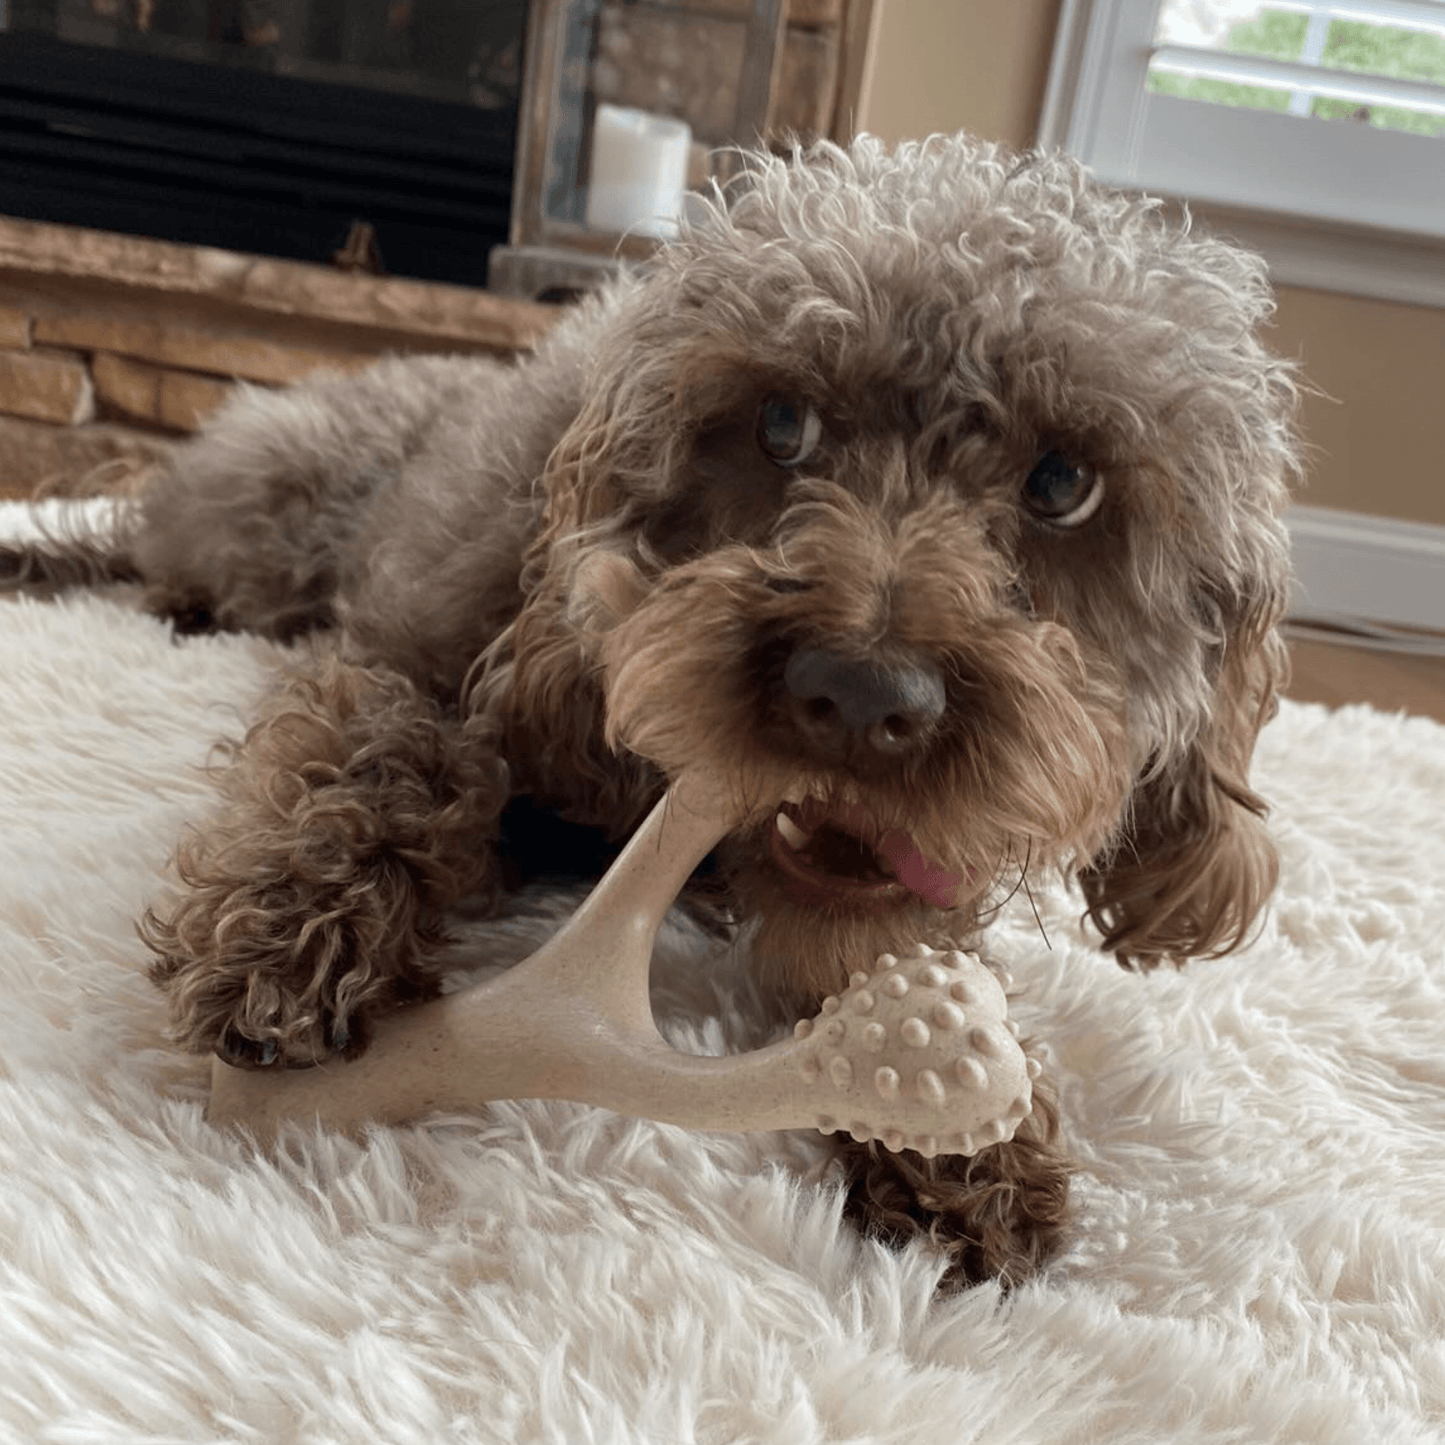 BetterBone TOUGH | Durable All-Natural, Food-Grade, Eco-Friendly, Dental Cleaning Chew for Aggressive Chewer Dogs & Puppies by The Better Bone Natural Dog Bone - The Hammer Sports